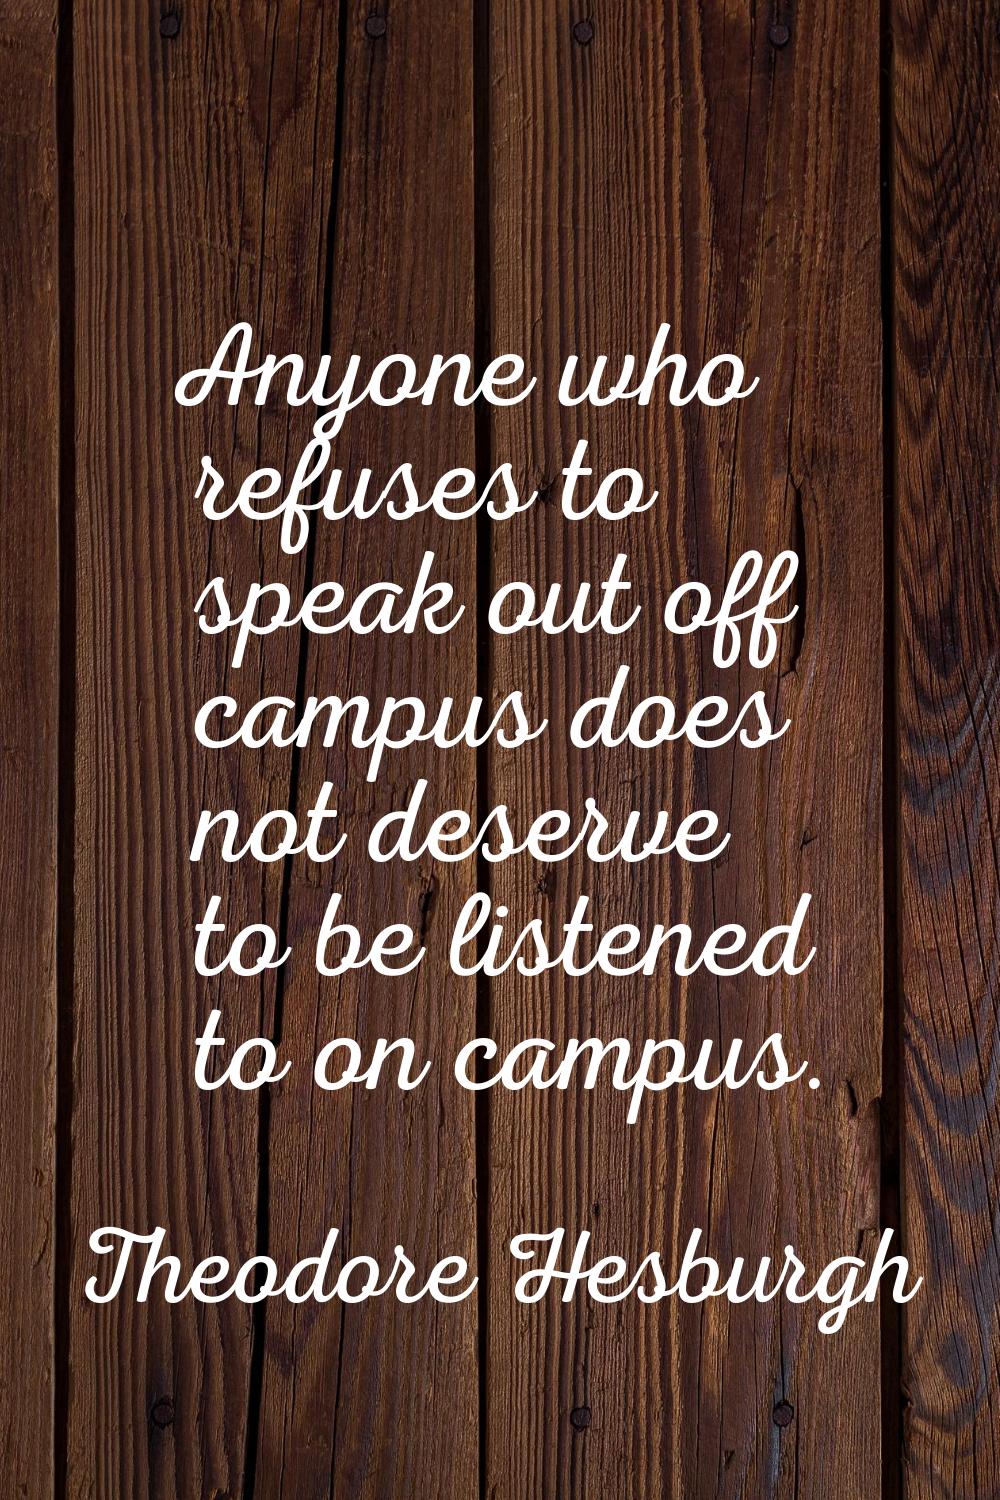 Anyone who refuses to speak out off campus does not deserve to be listened to on campus.